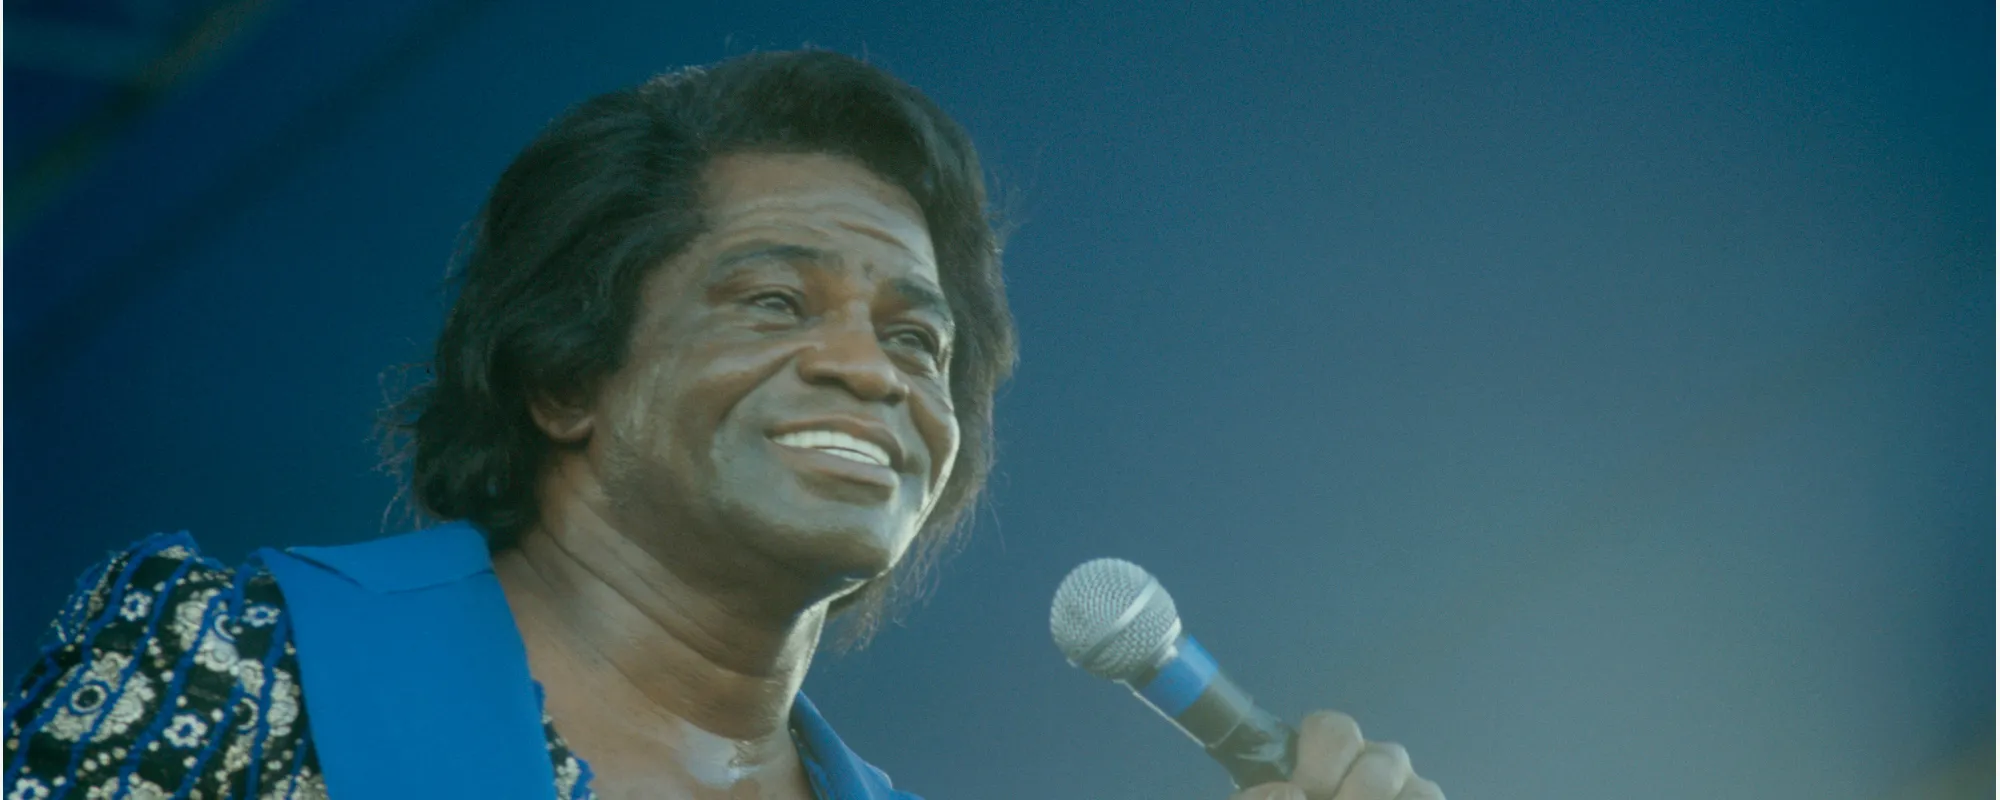 6 MORE Songs You Didn’t Know James Brown Wrote for Other Artists